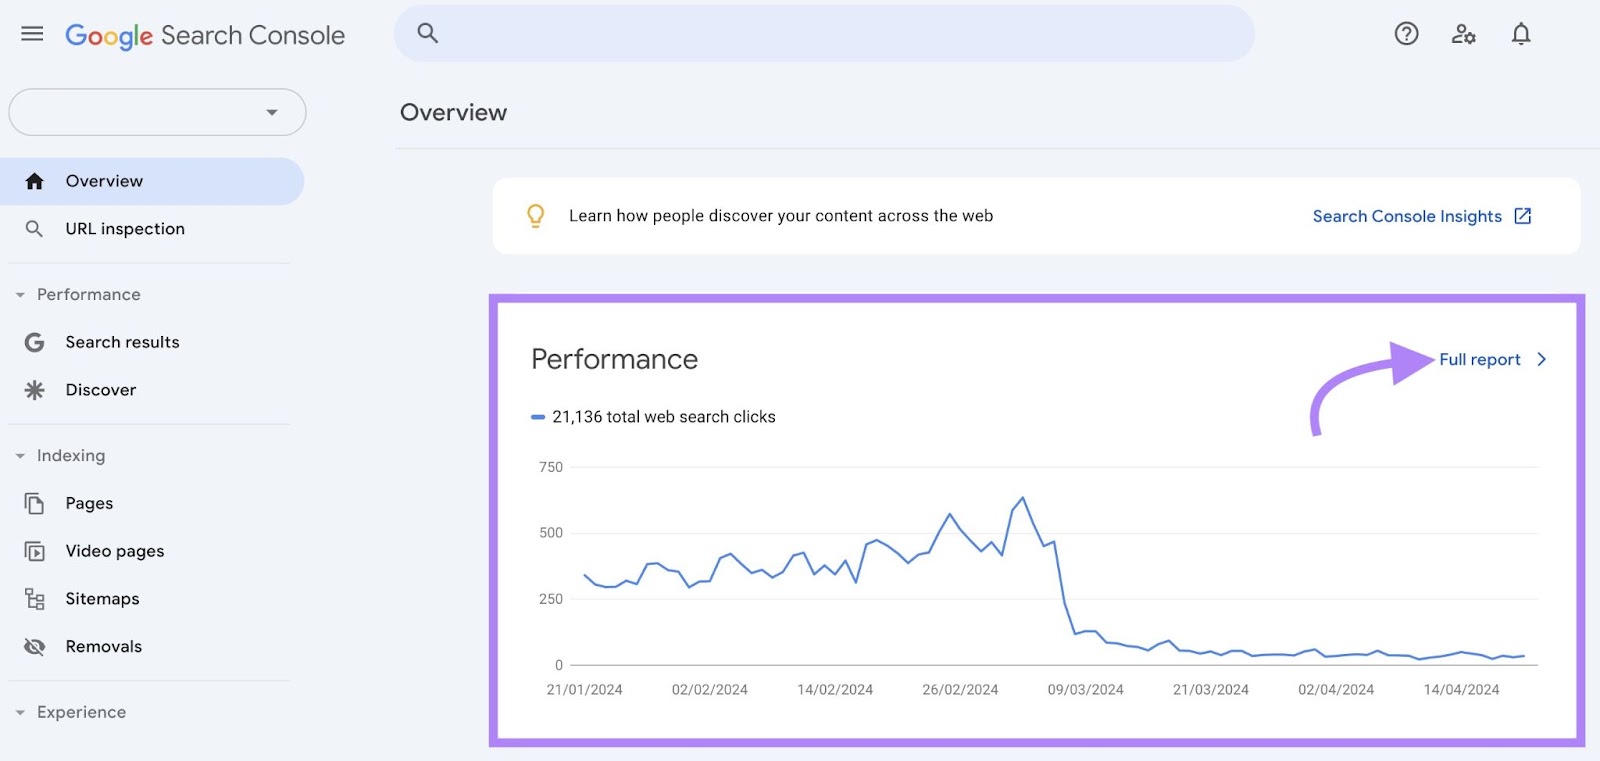 Performance chart in the Google Search Console